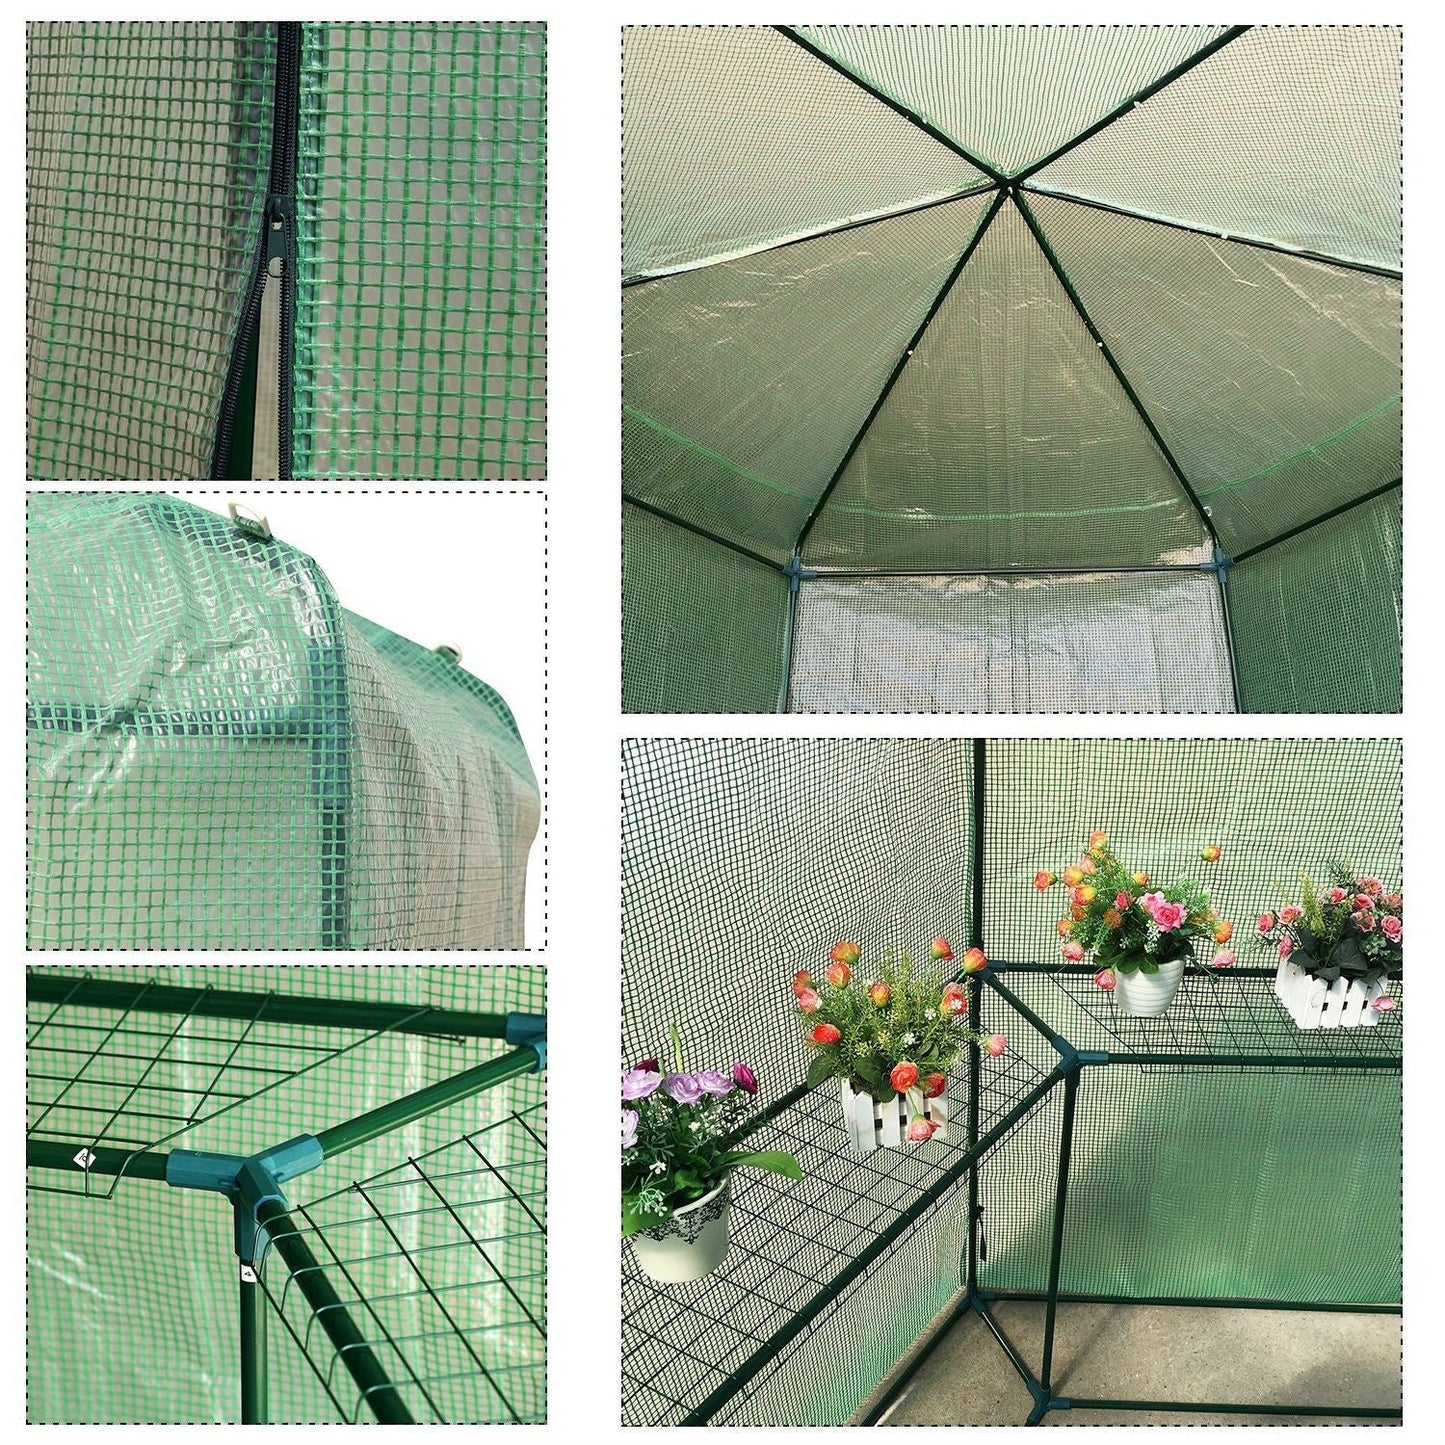 Outdoor > Gardening > Greenhouses - Outdoor Hexagon Greenhouse 6.5 X 7 Ft With Steel Frame PE Cover And Shelves